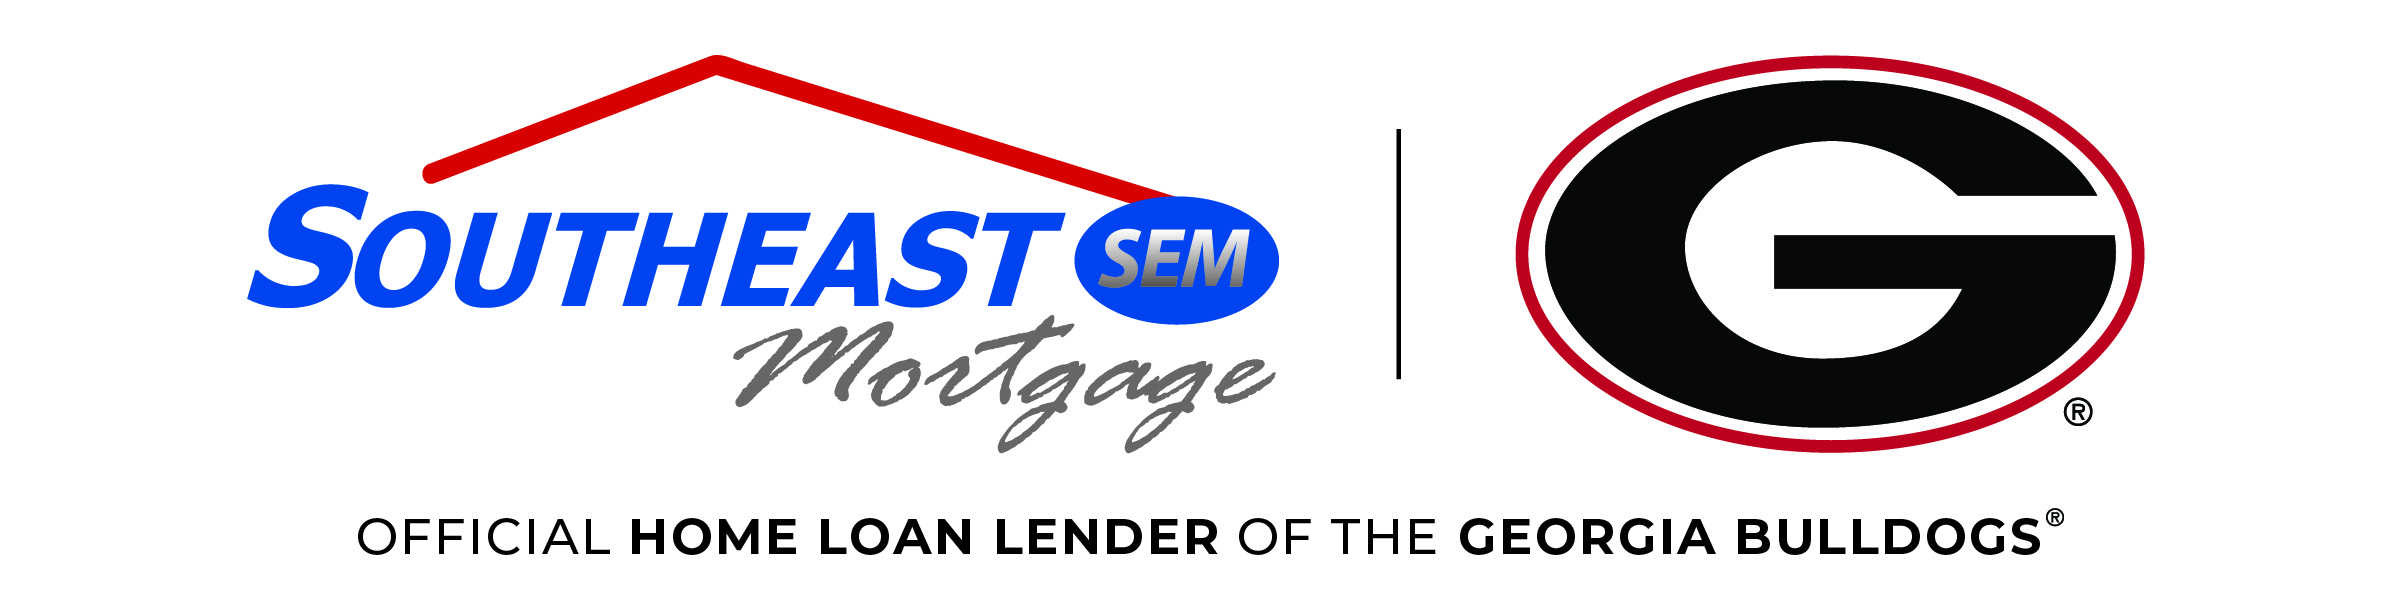 Southeast Mortgage – The Official Home Loan Lender of The Georgia Bulldogs